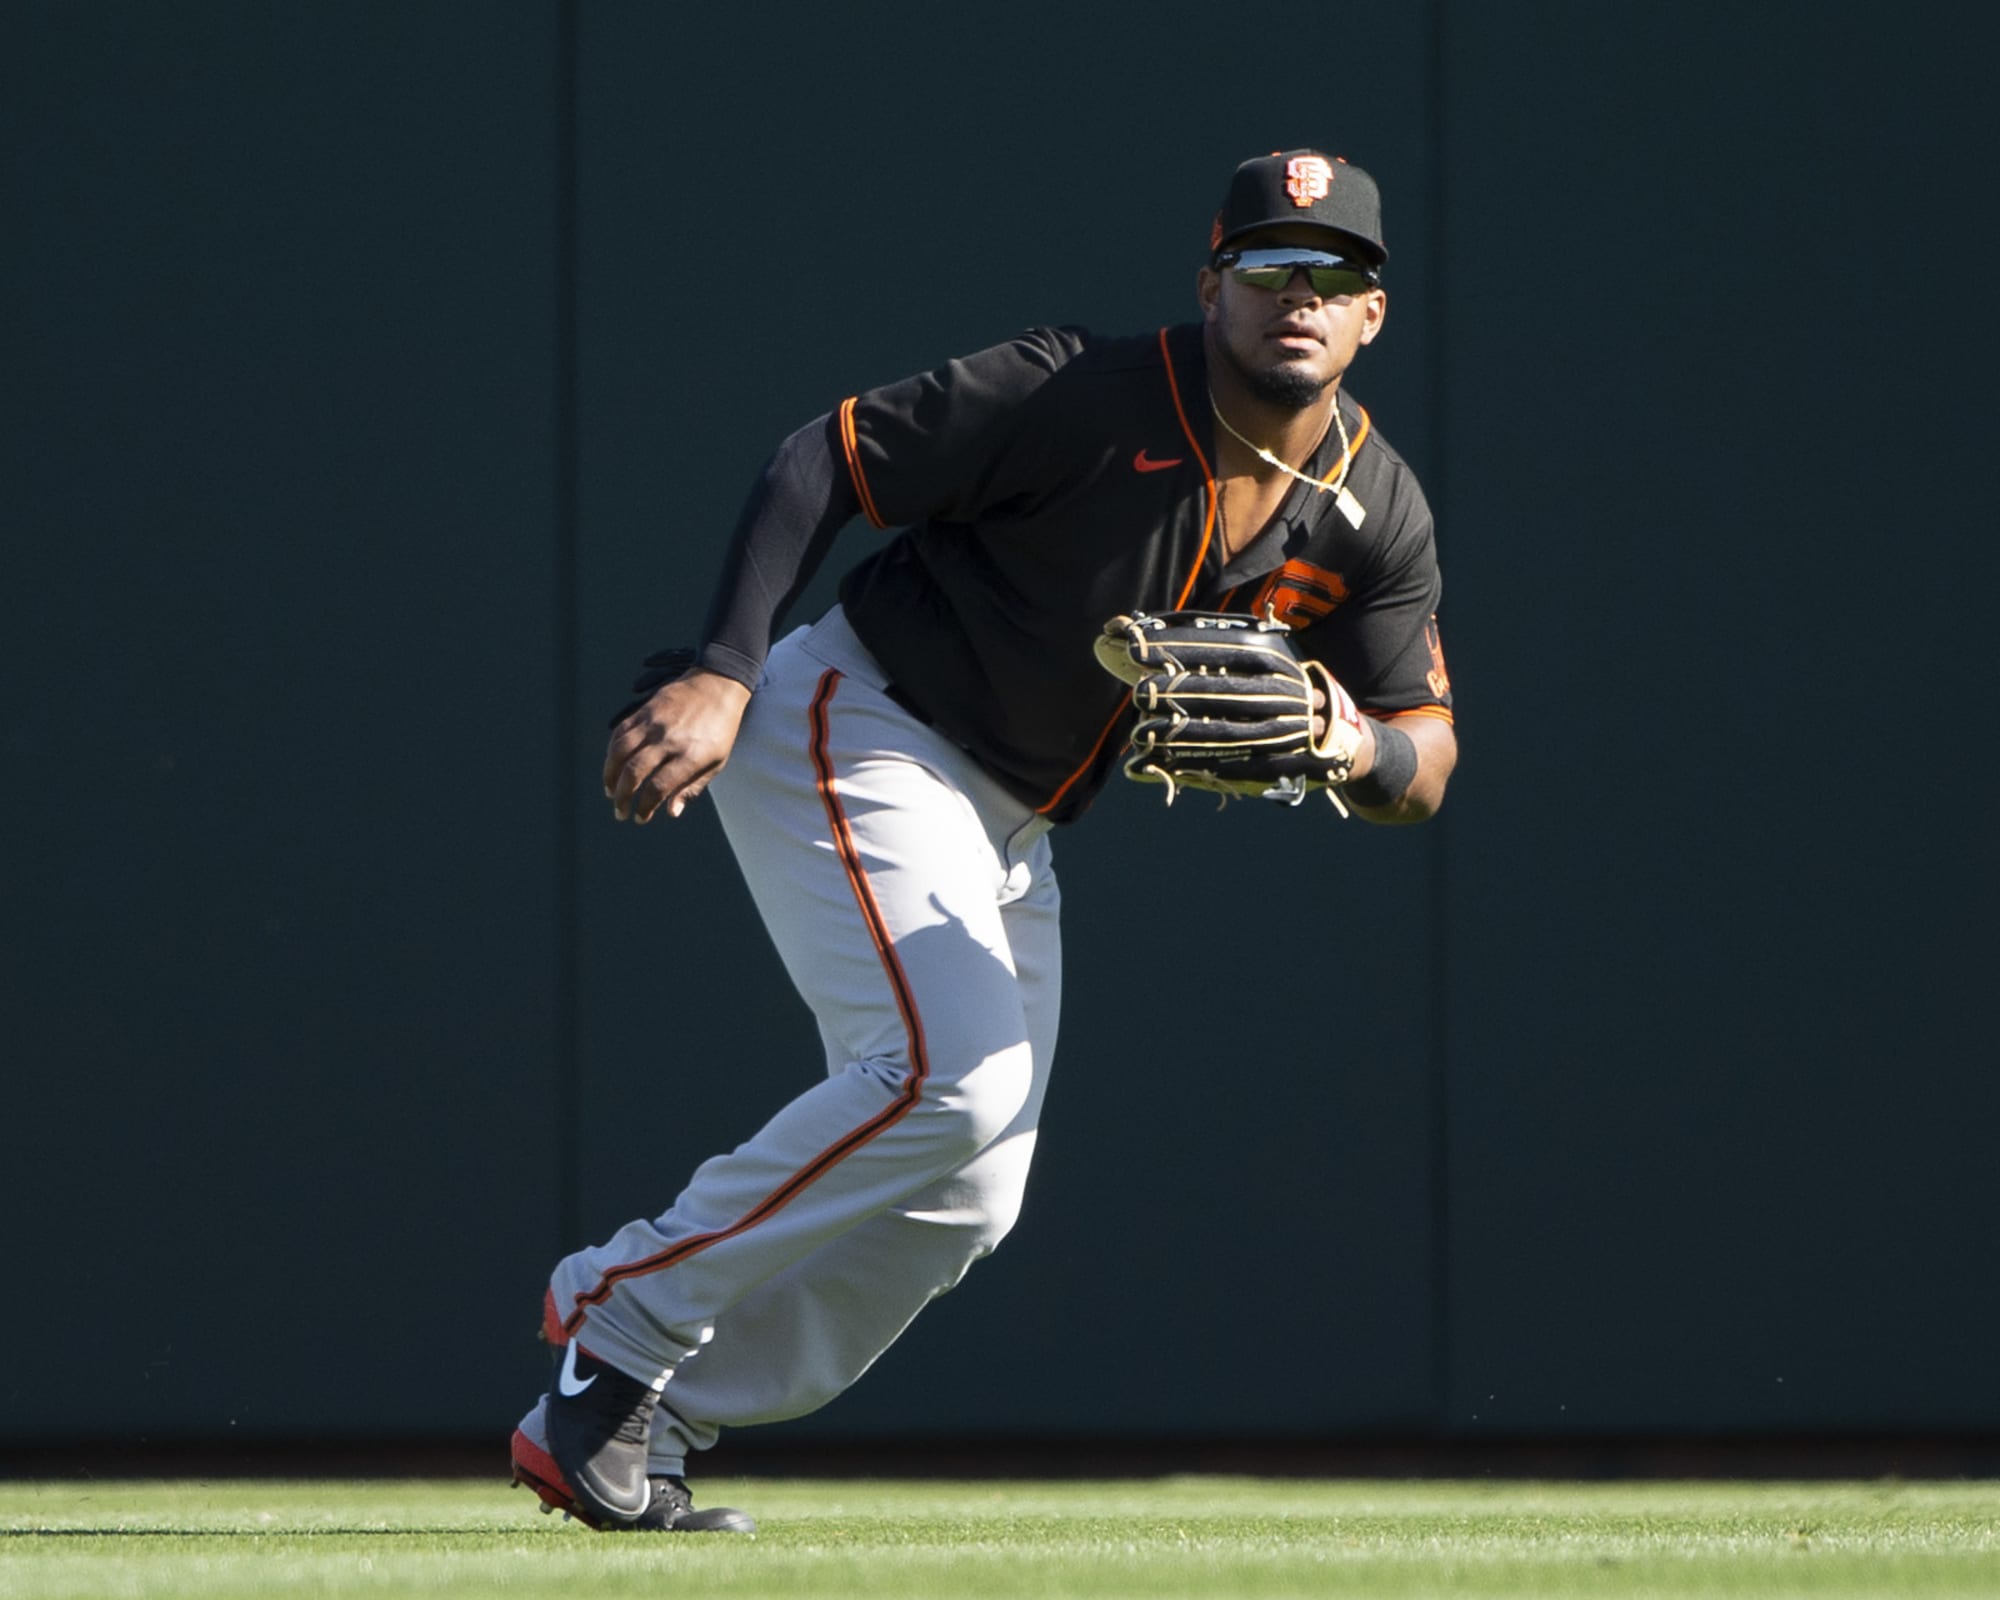 SF Giants: Joey Bart, Heliot Ramos, and others could see time in